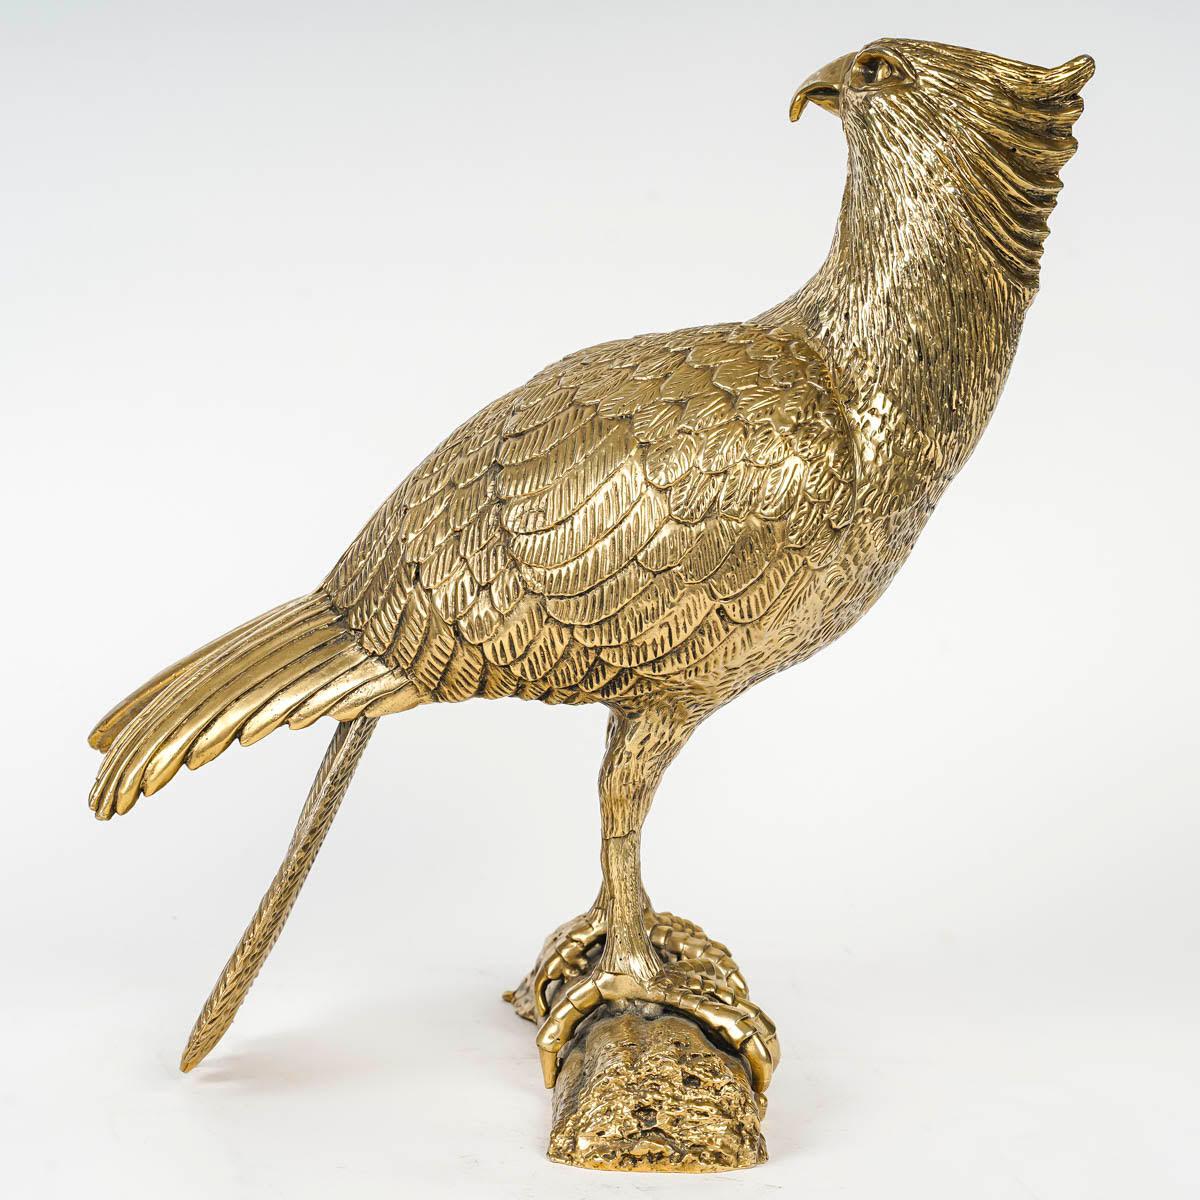 Large sculpture of an eagle in silver plated metal, 20th century.

Sculpture of an eagle in silver plated metal, could be a sculpture for a desk or a nice centerpiece, Empire style, XXth century.
h: 34 cm, w: 36cm, d: 21cm